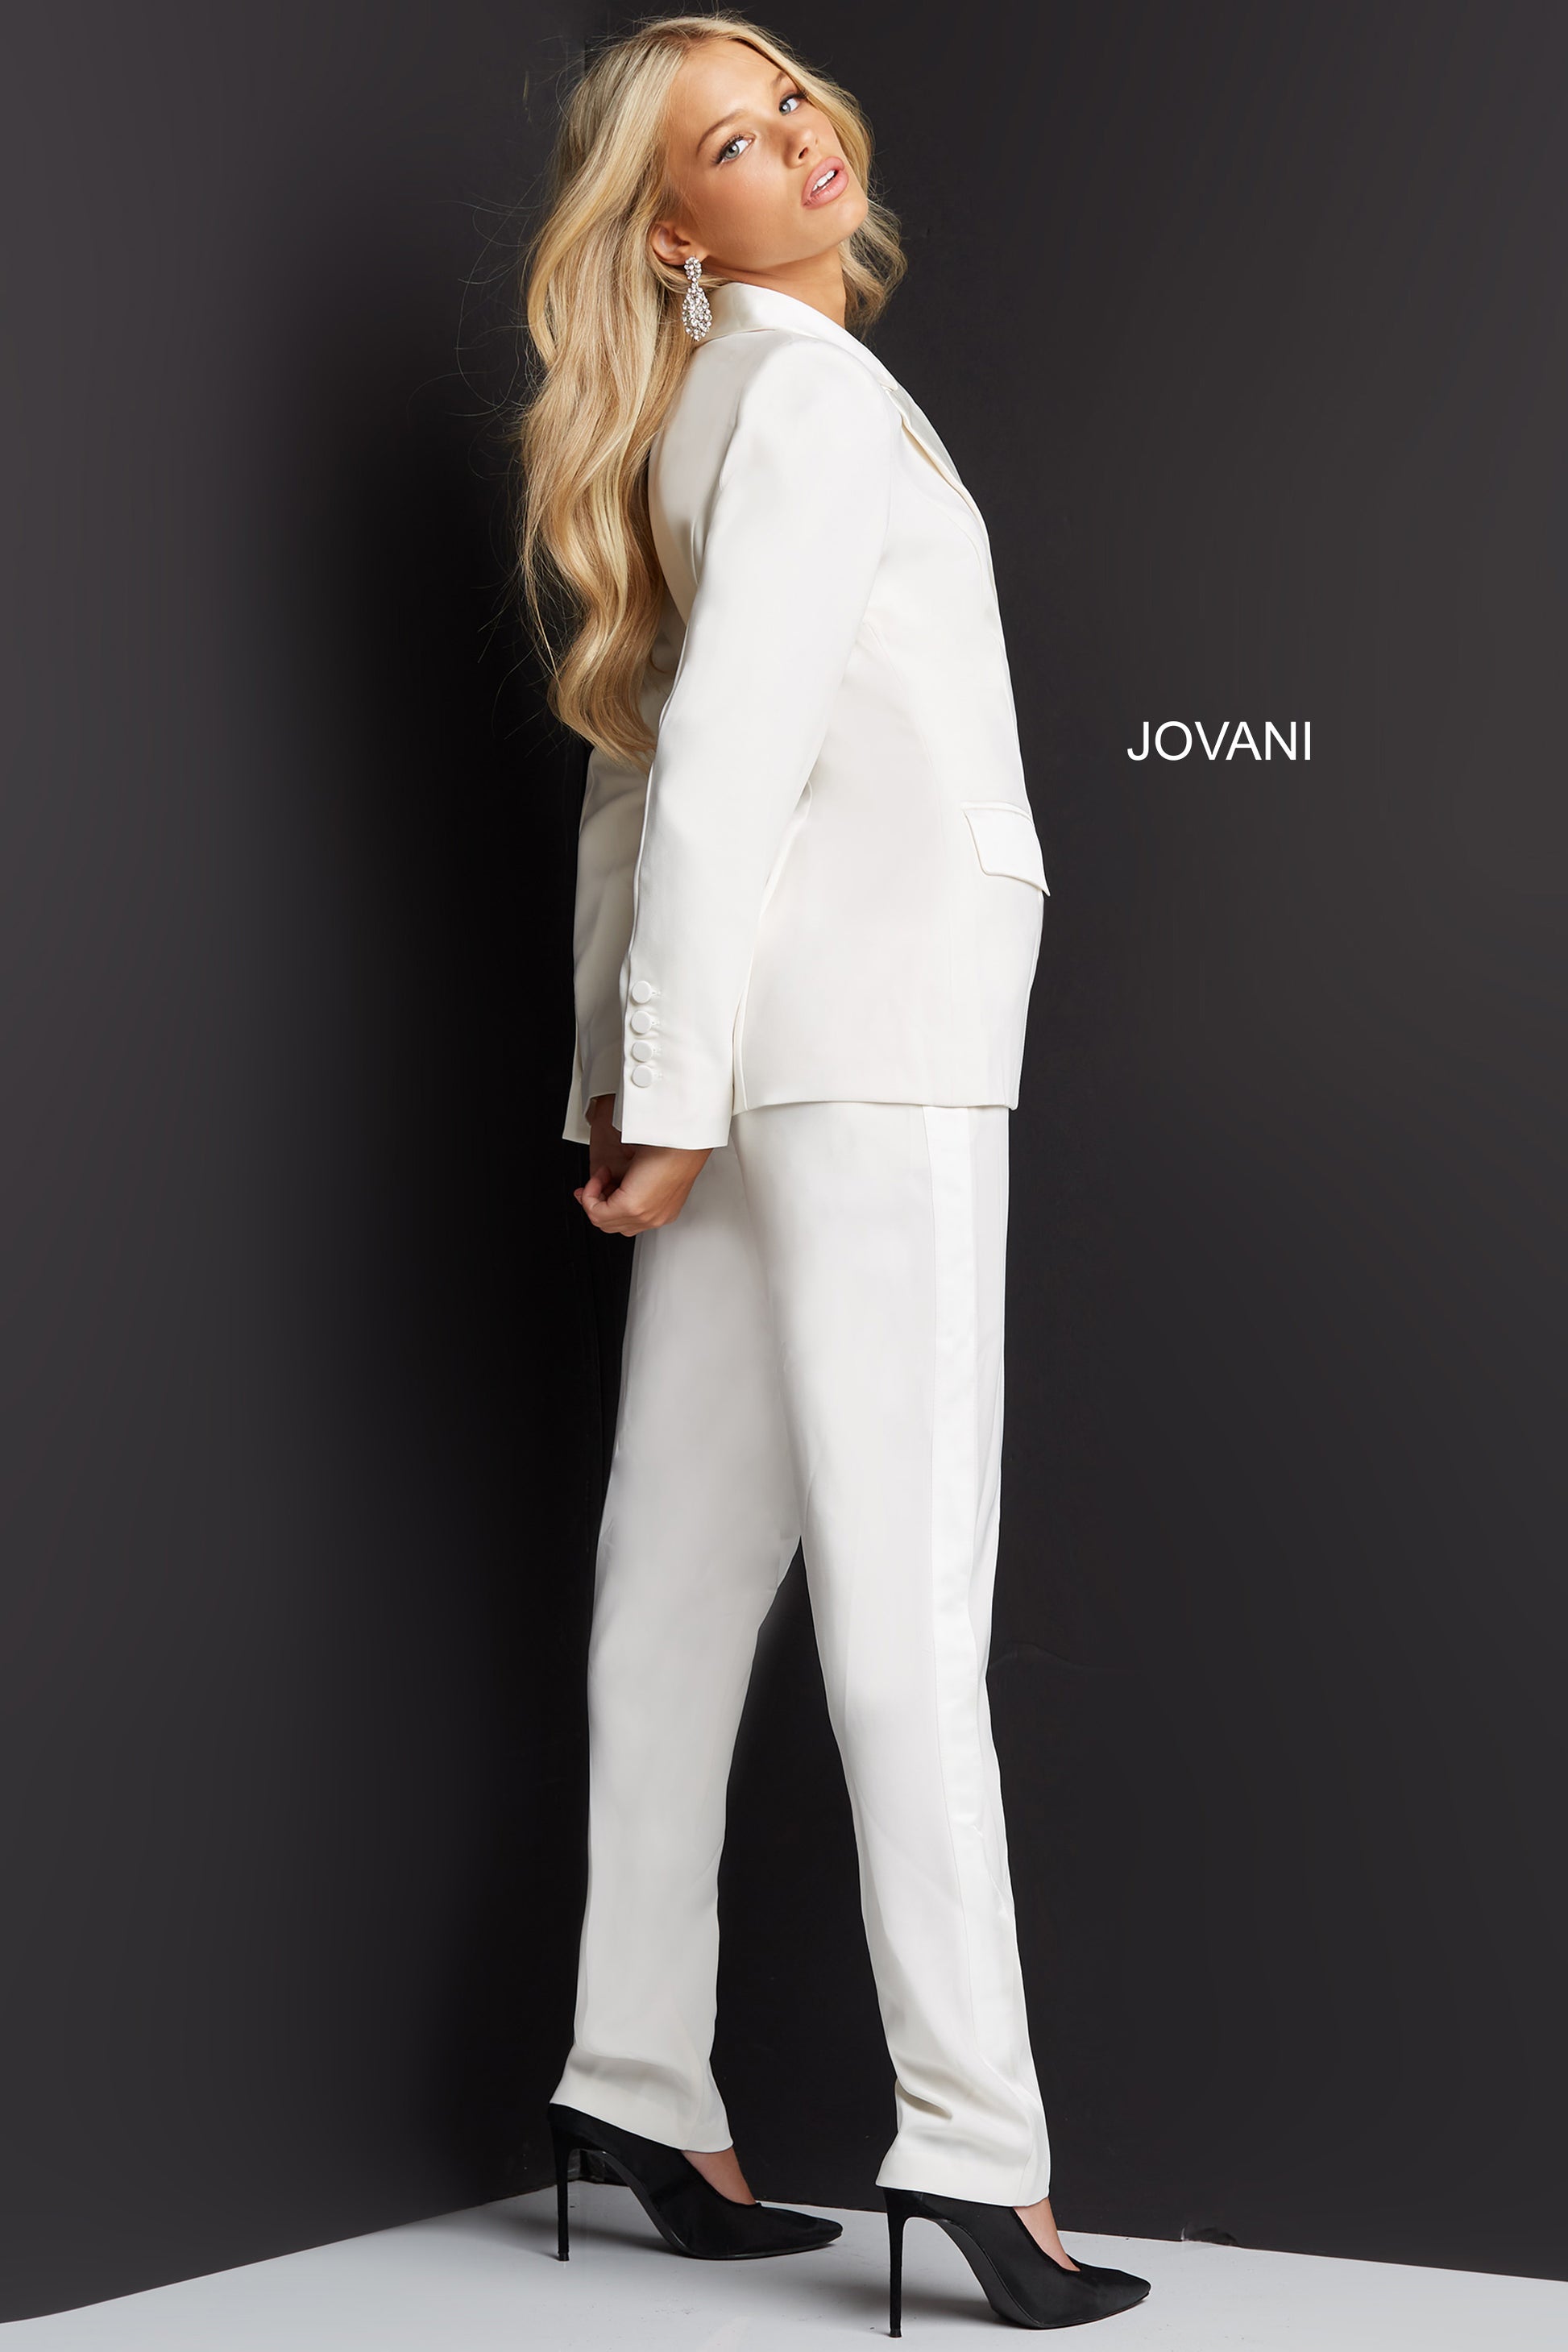 Jovani 07293 Long Jumpsuit Prom Pageant Tuxedo Formal Black Ivory  Available Size-00-24  Available Color- Black, Ivory